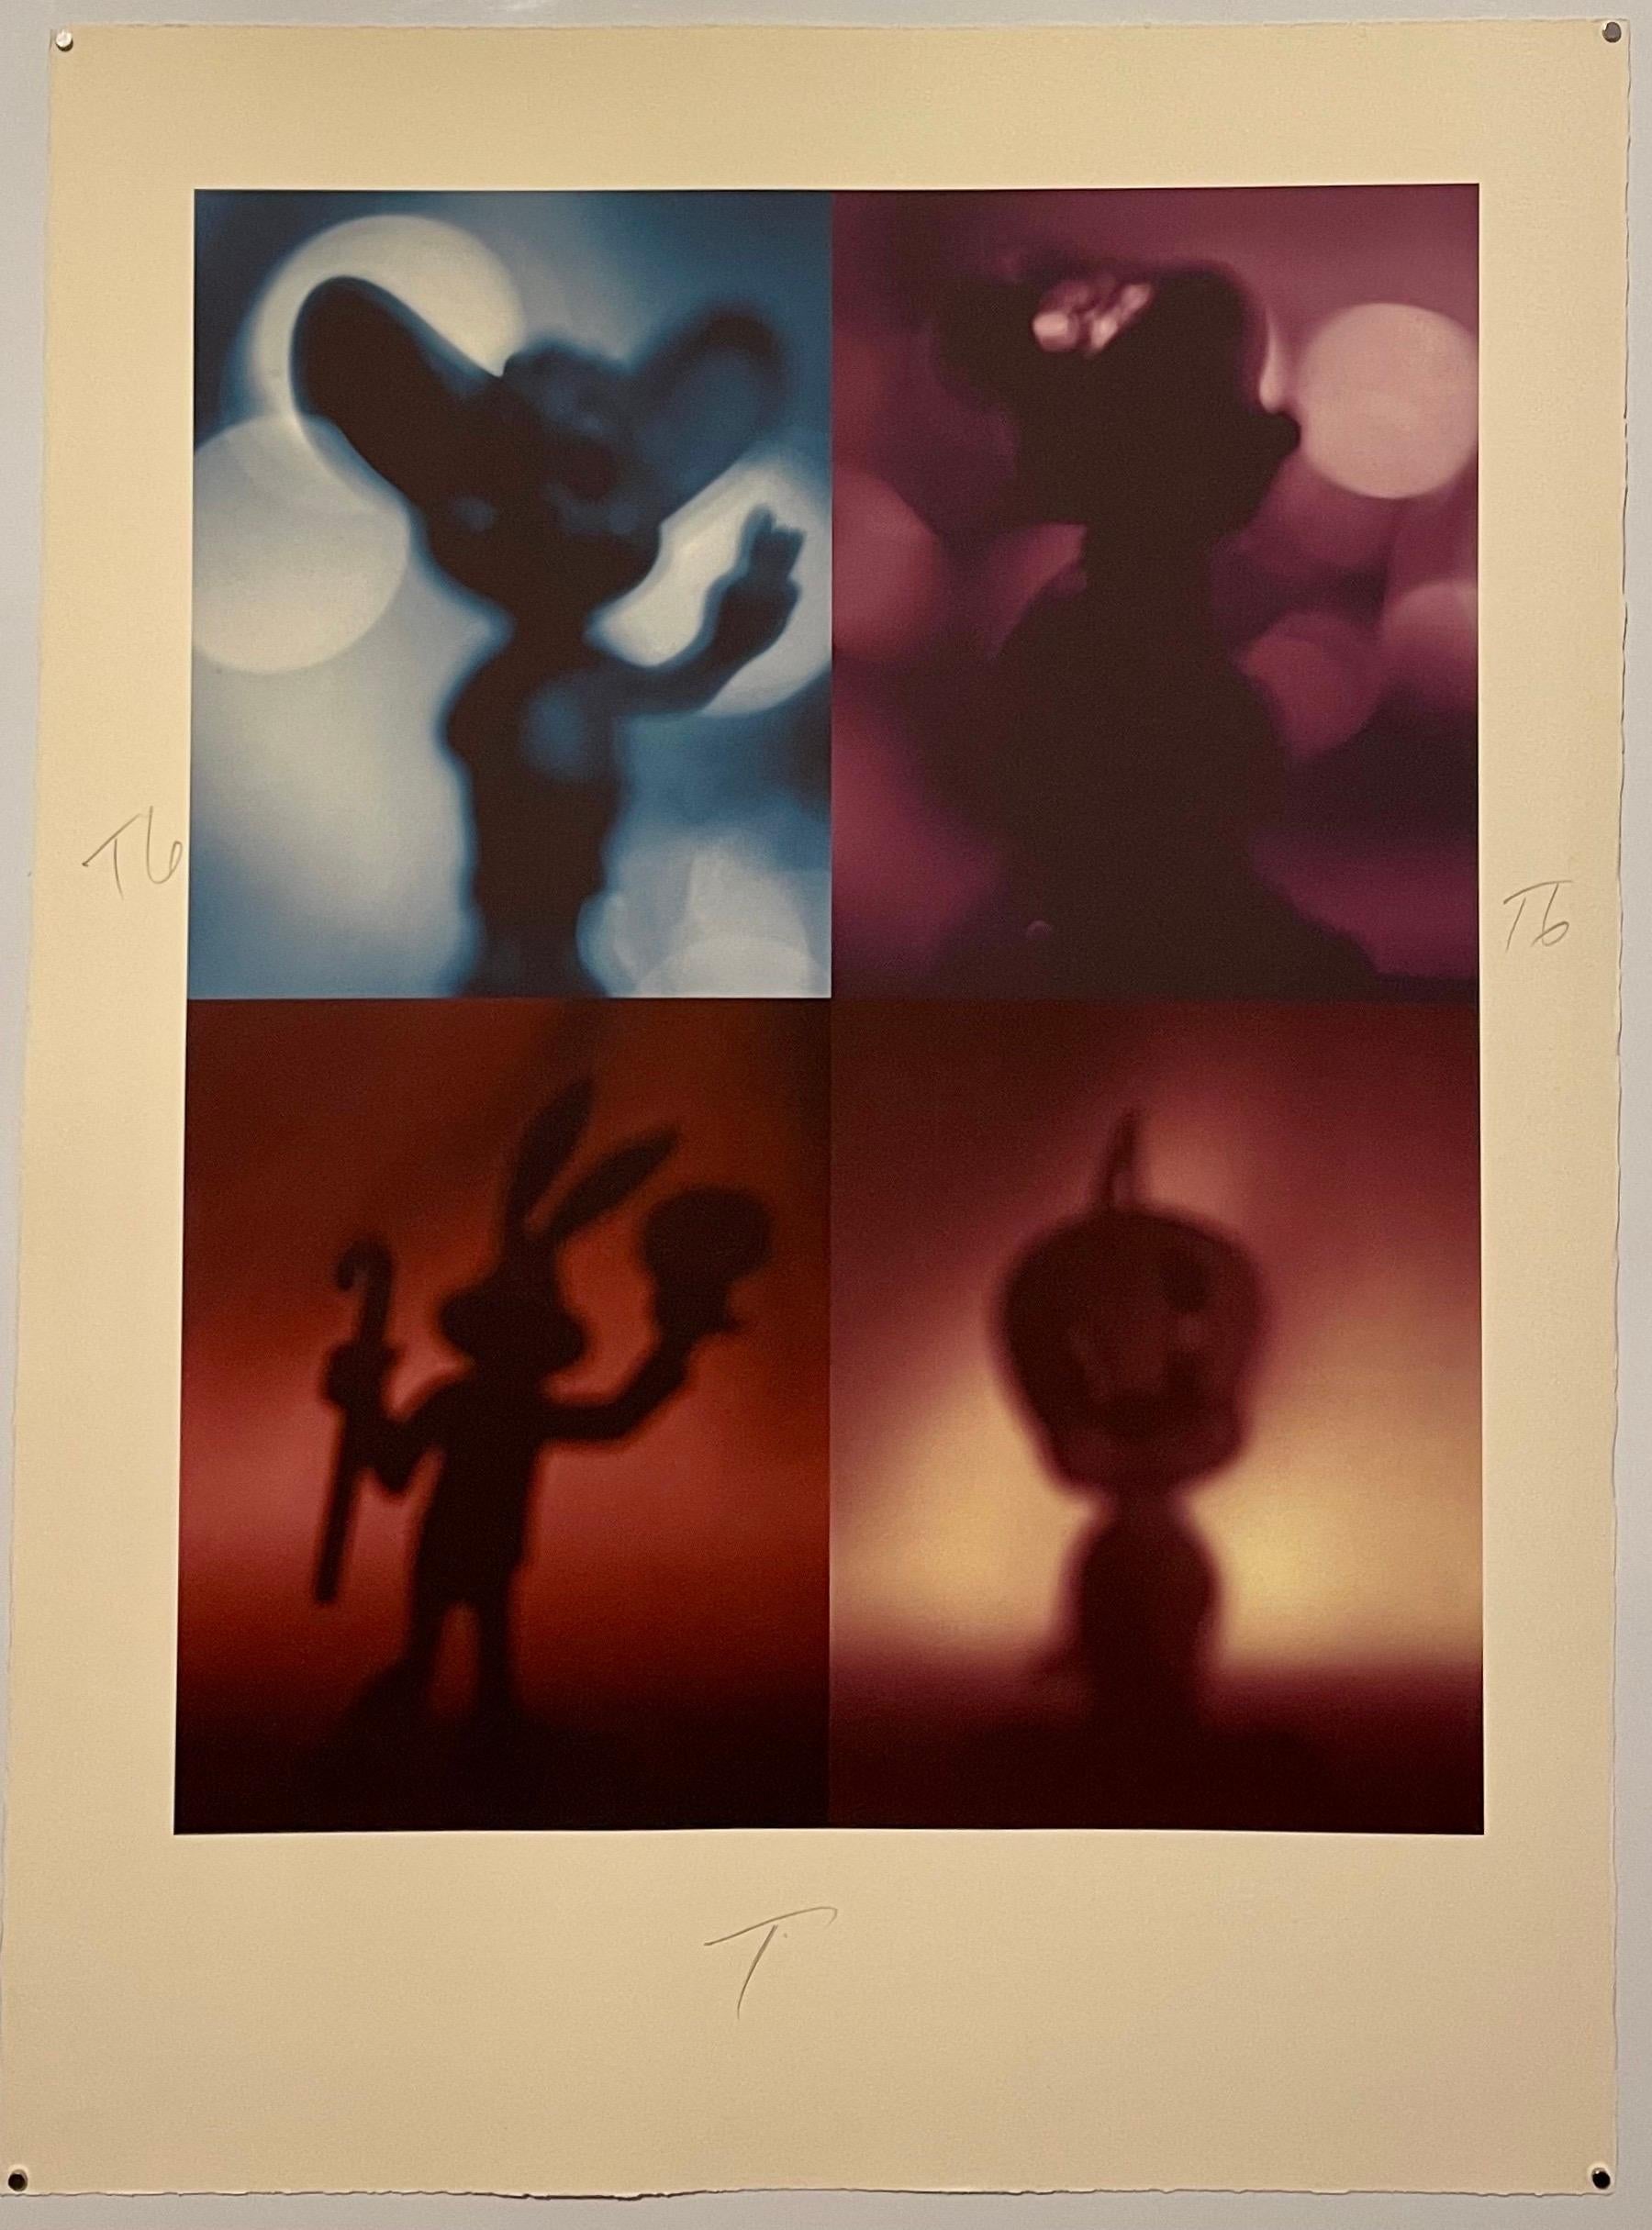 From his series SHADOW CARTOONS.
Color iris print, hand initialed in pencil, This is not numbered. 
It is on Somerset watermarked archival paper
Paper size is 30 X 22.25, images 22.75 x 18 with full margins. 

I believe these images were shown at